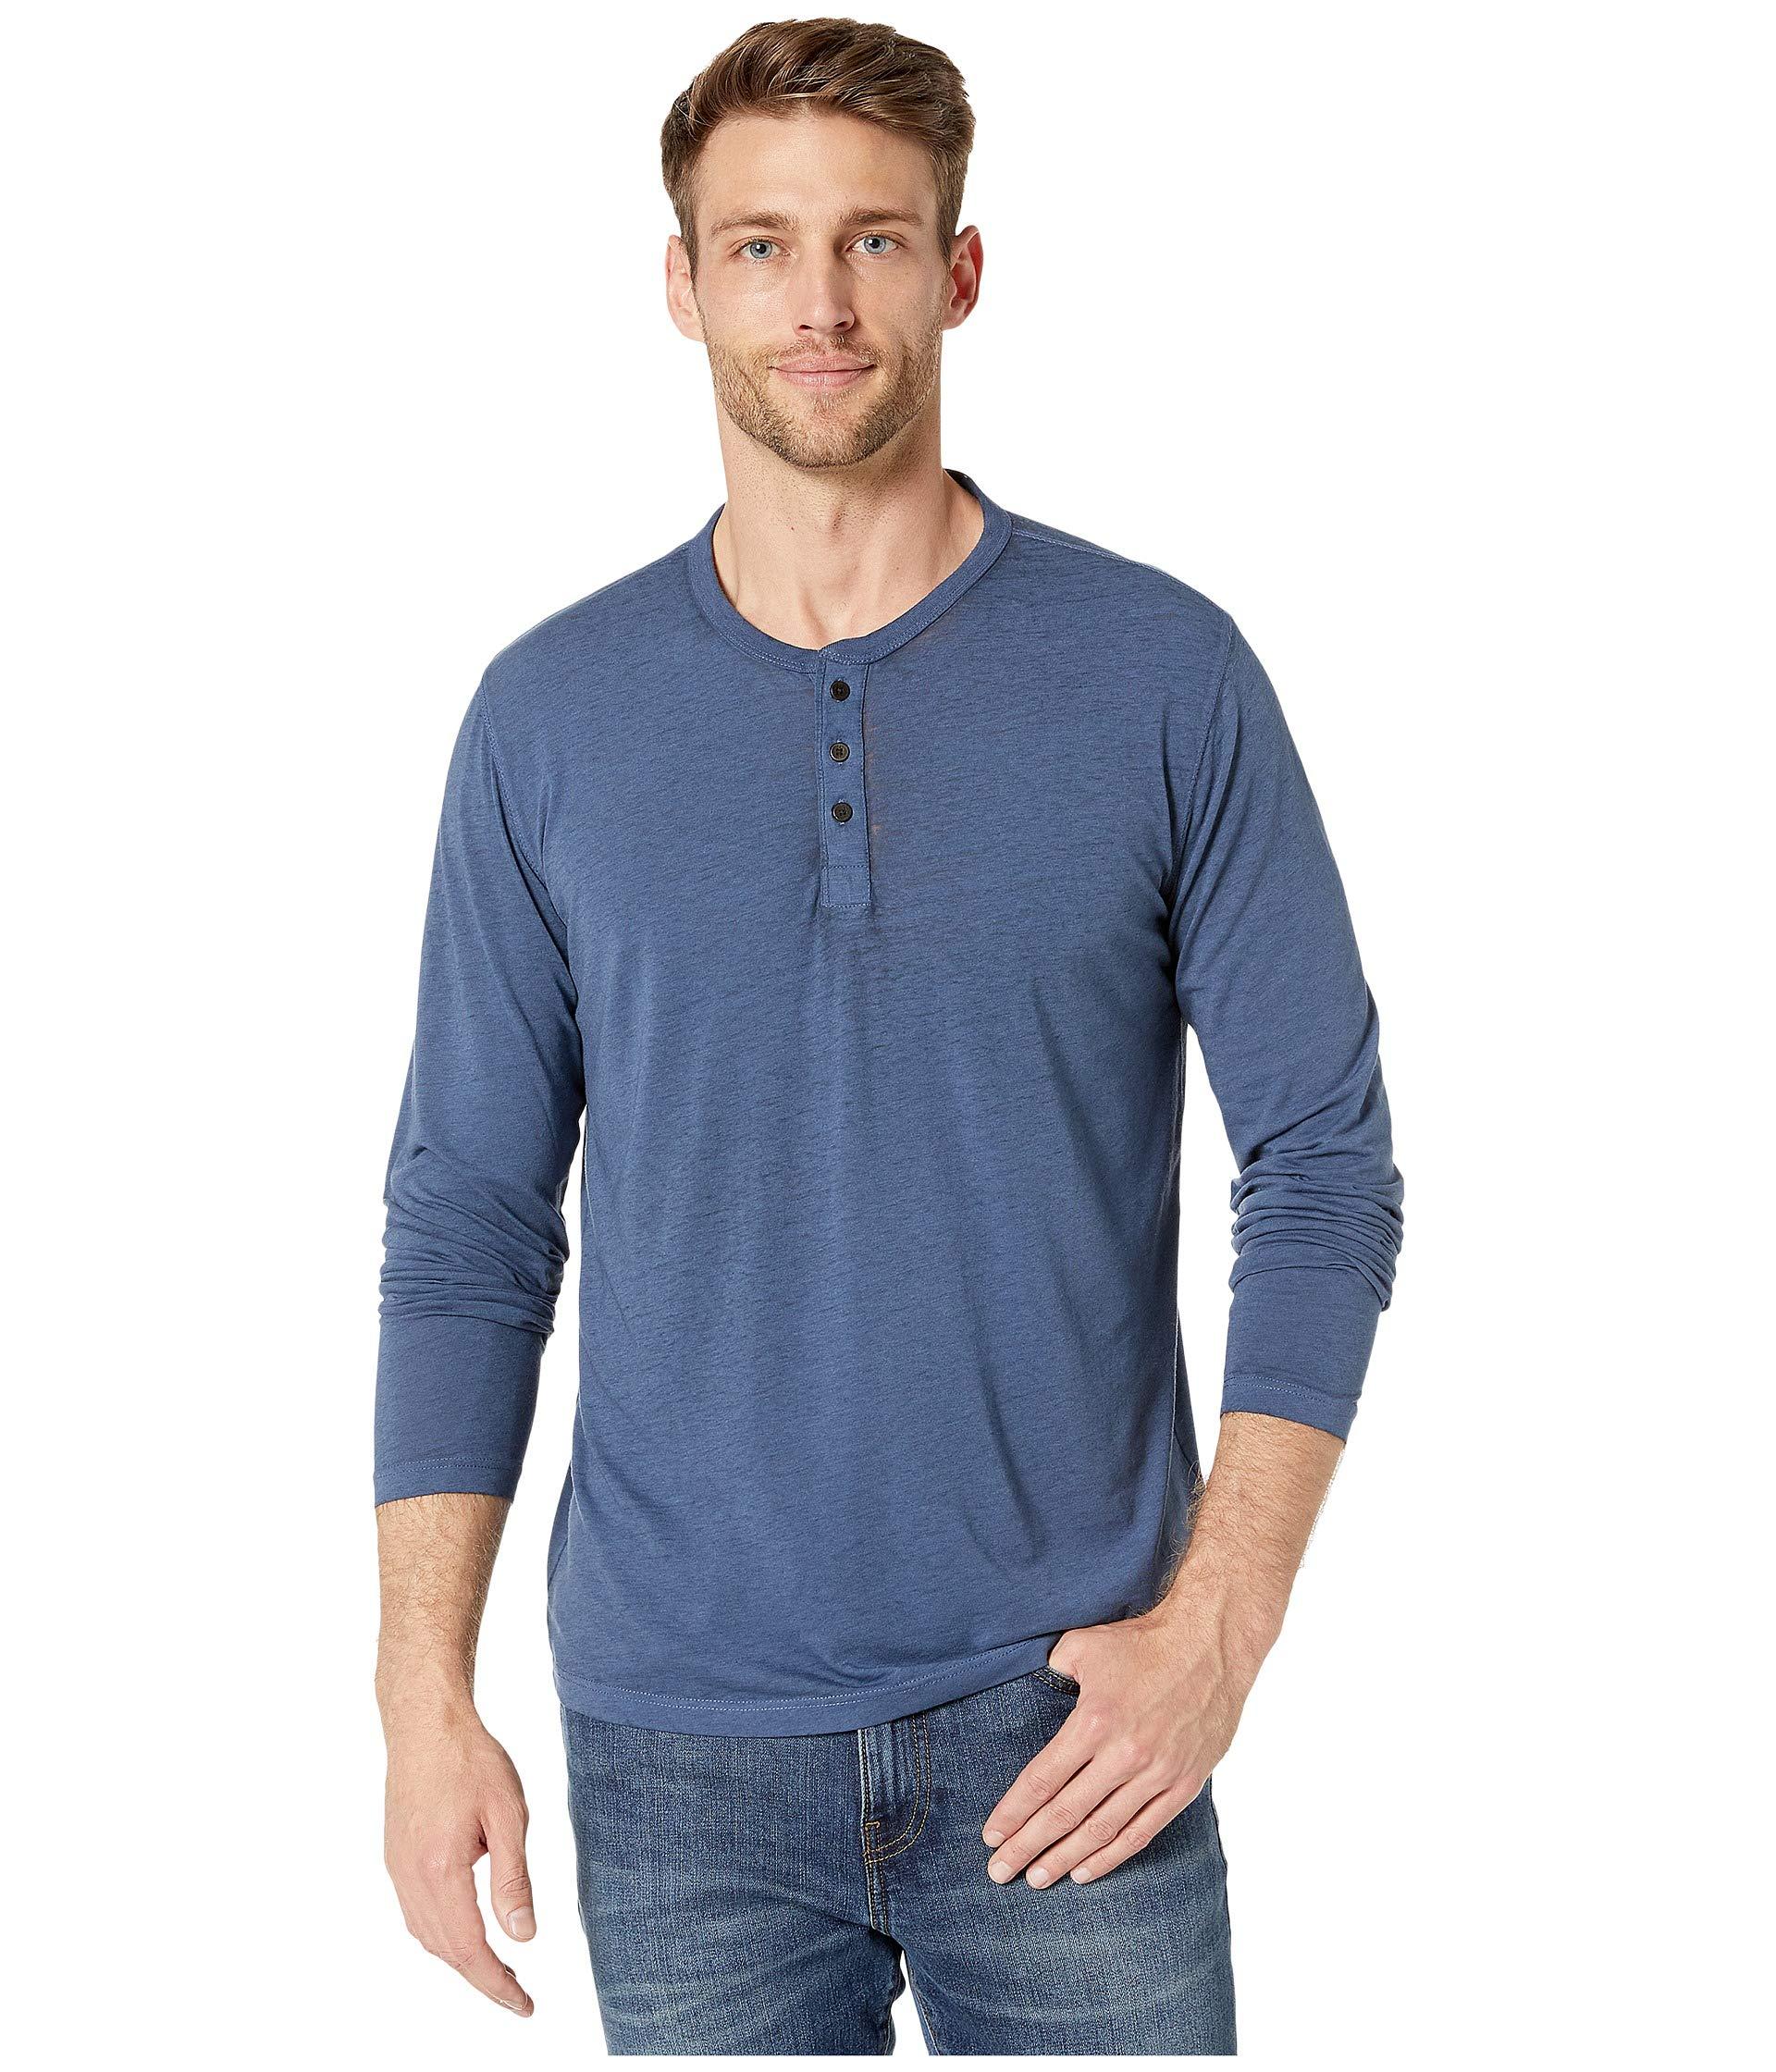 Lucky Brand Cotton Venice Burnout Henley in Blue for Men - Lyst